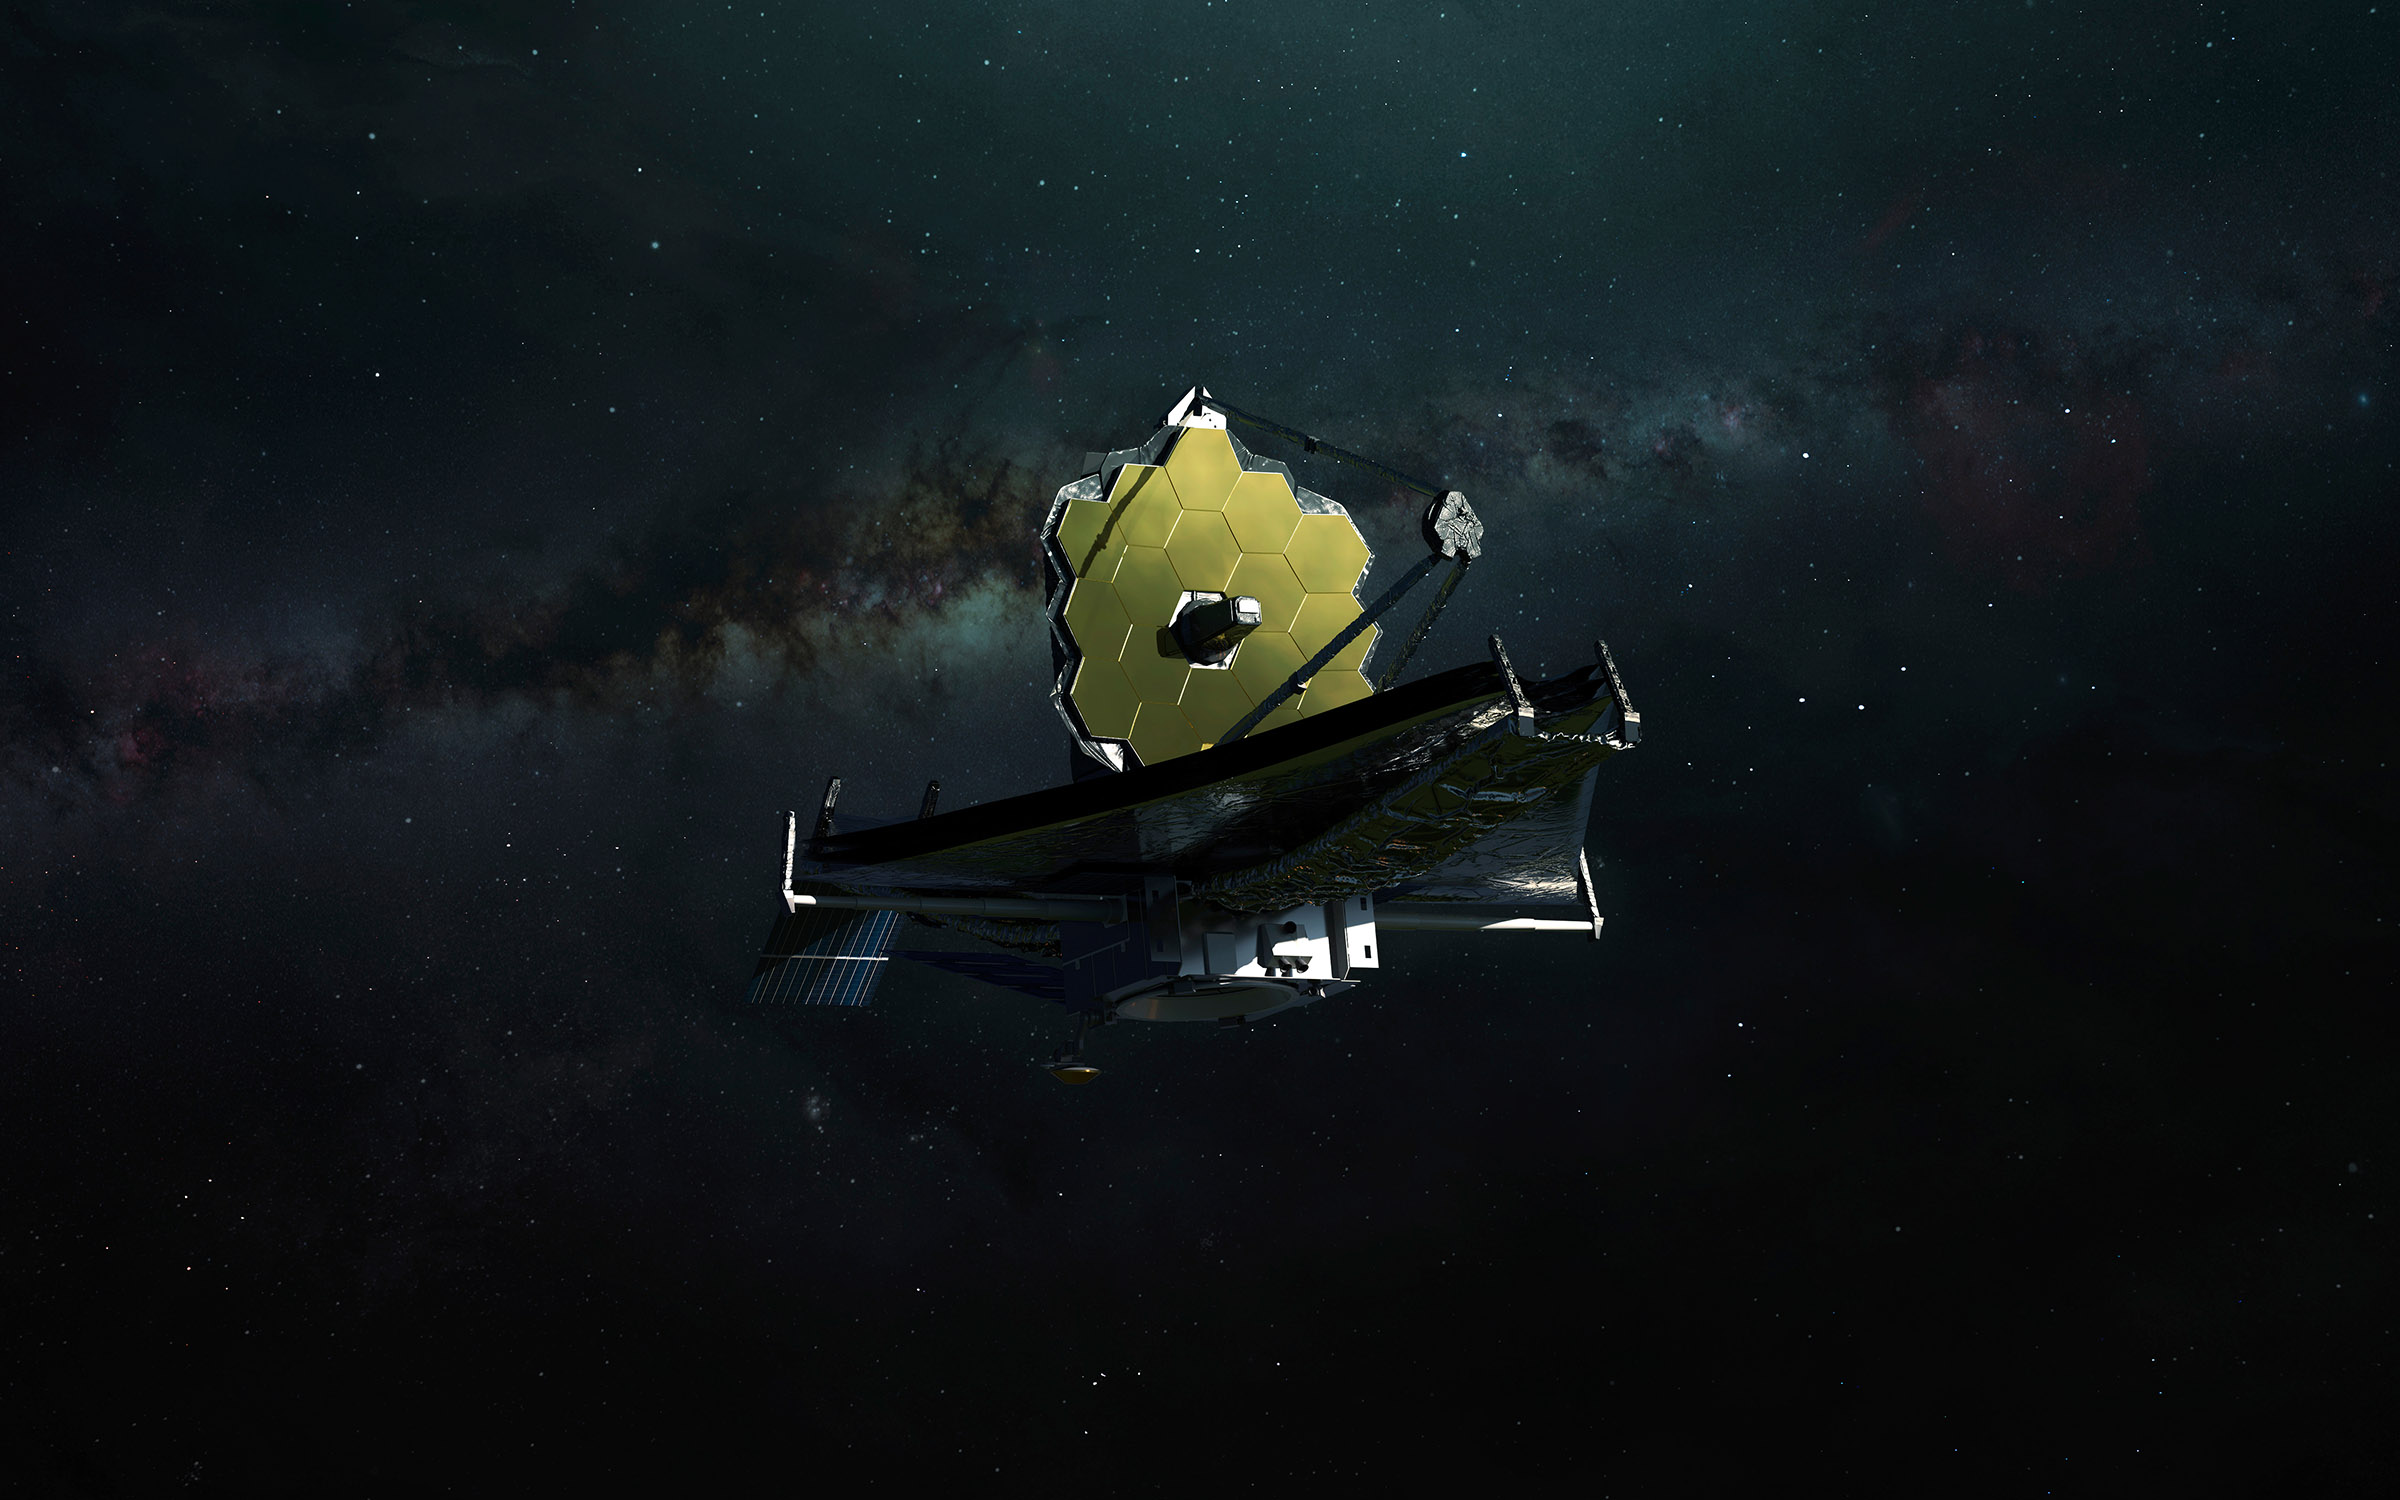 James Webb telescope is getting a successor in the Habitable Worlds Observatory